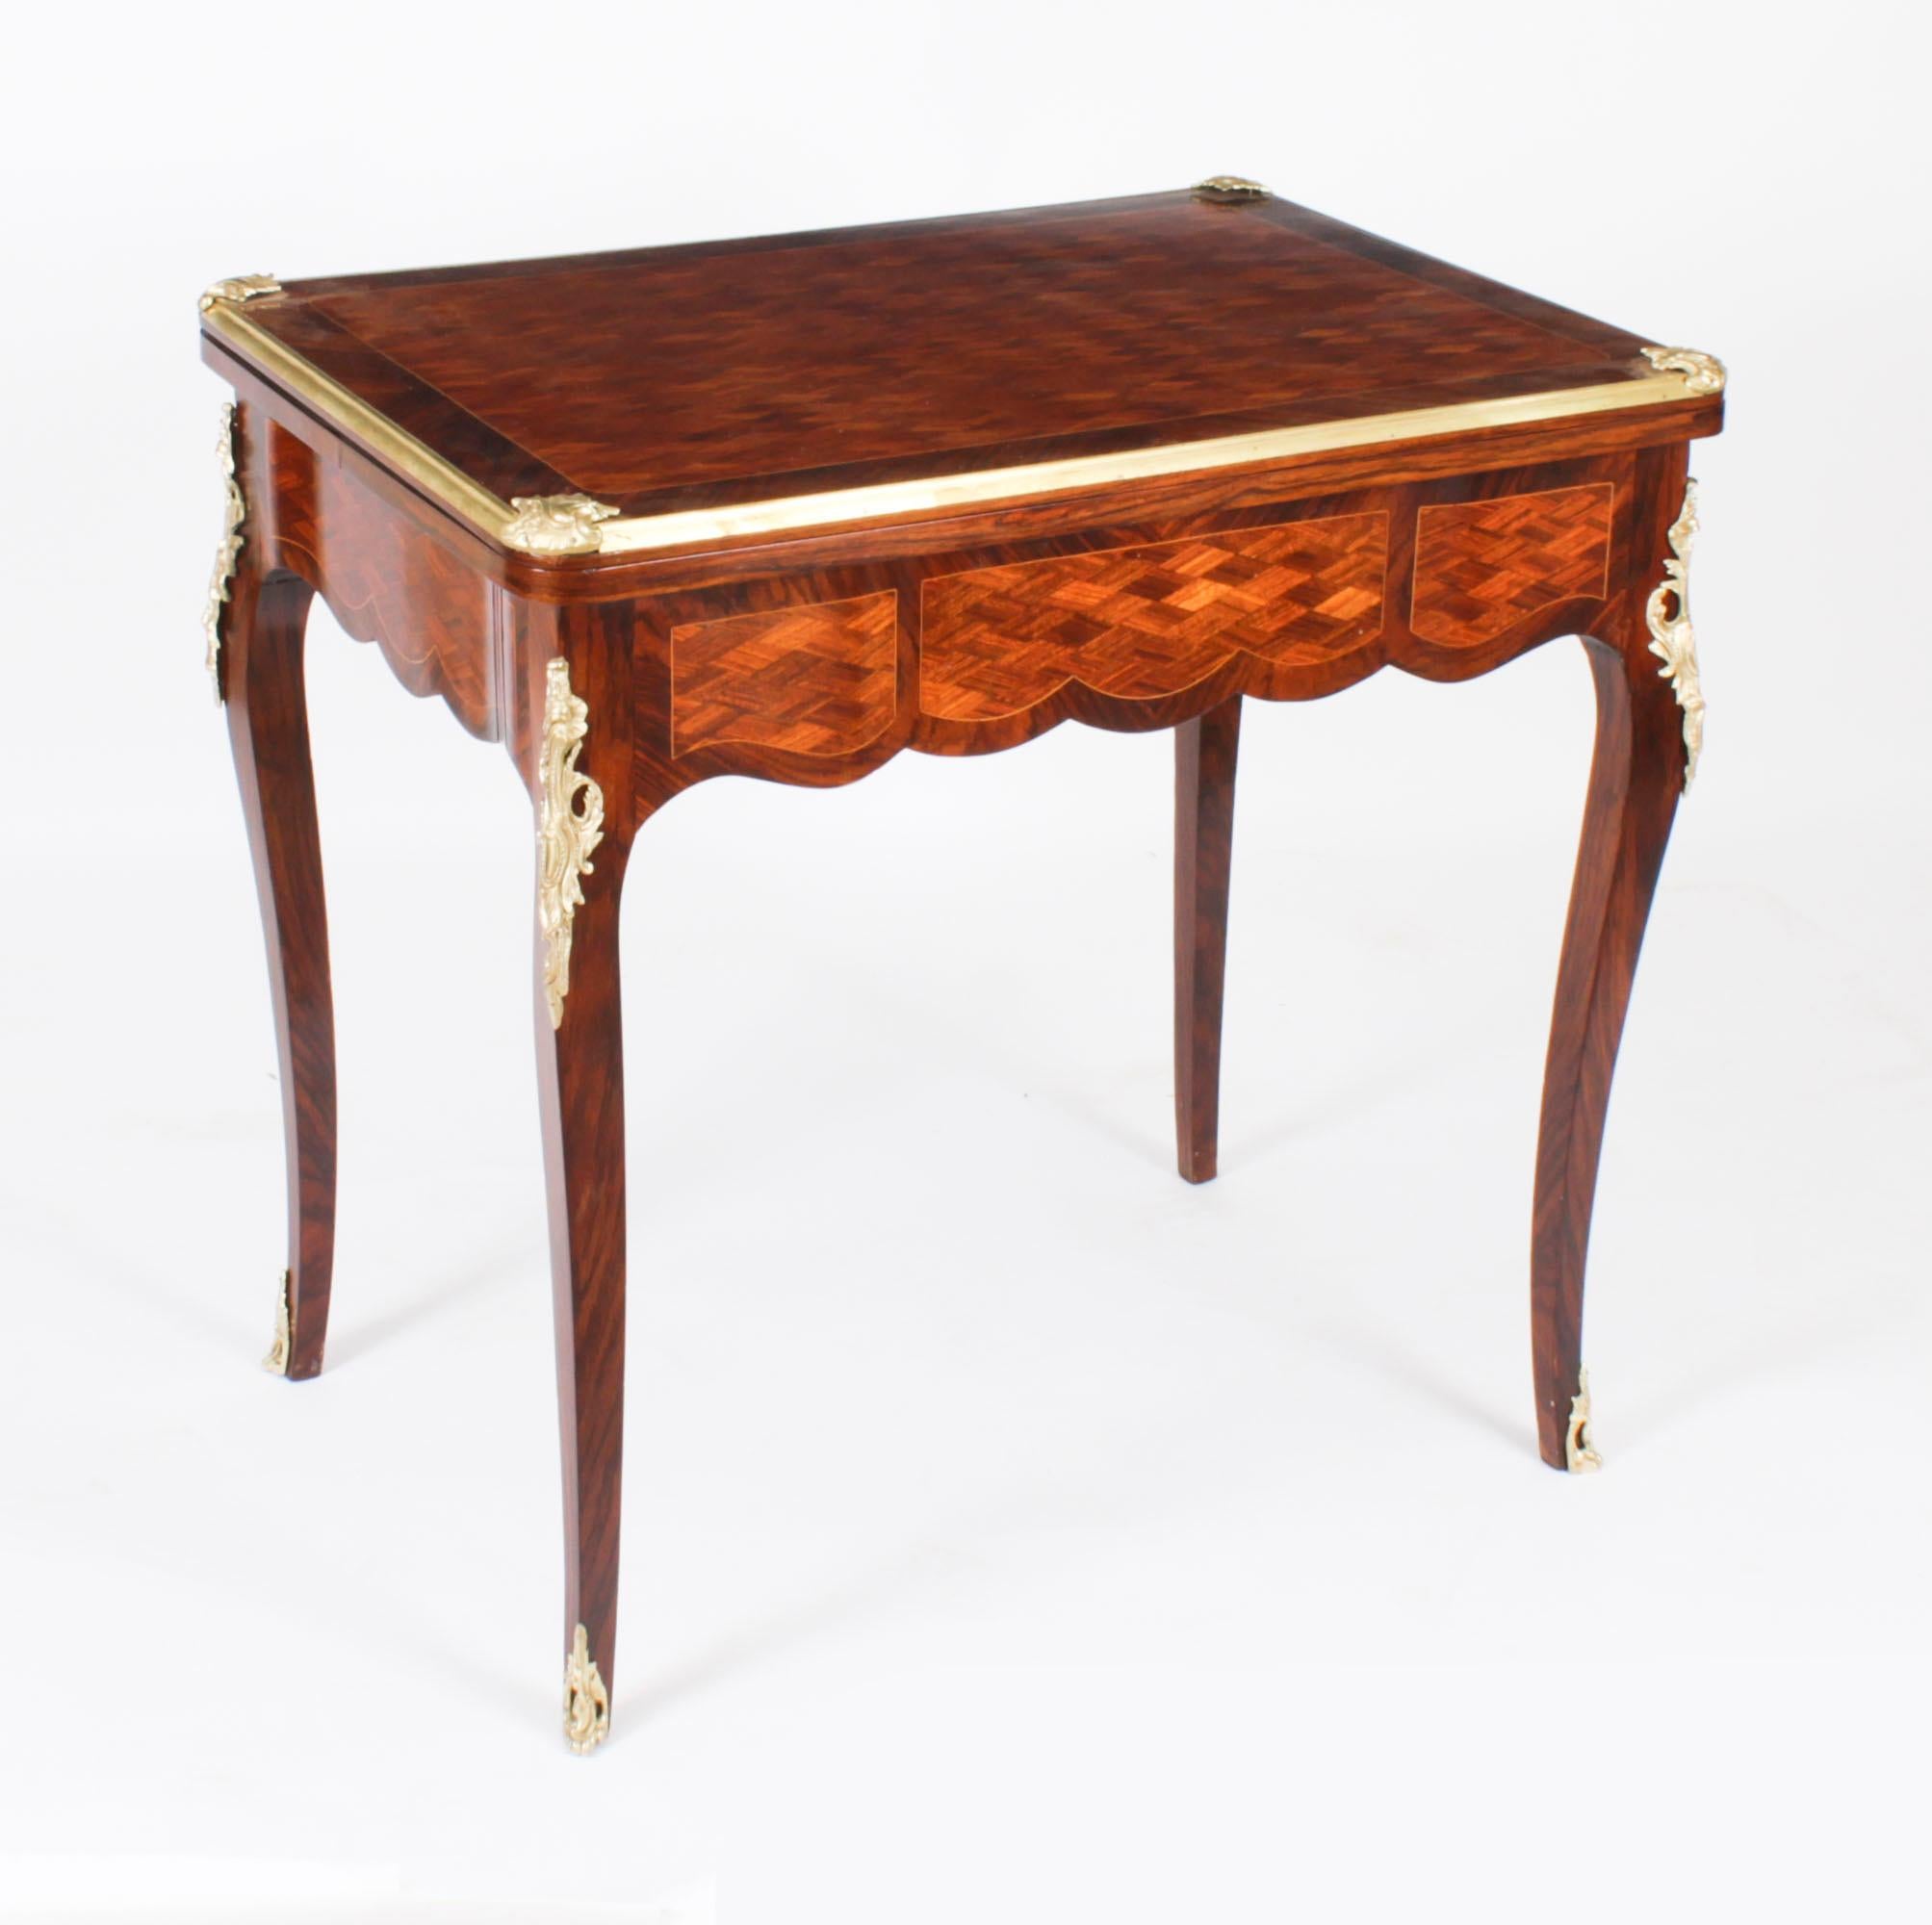 Antique French Burr Walnut Parquetry Card Backgammon Table 19th Century For Sale 13